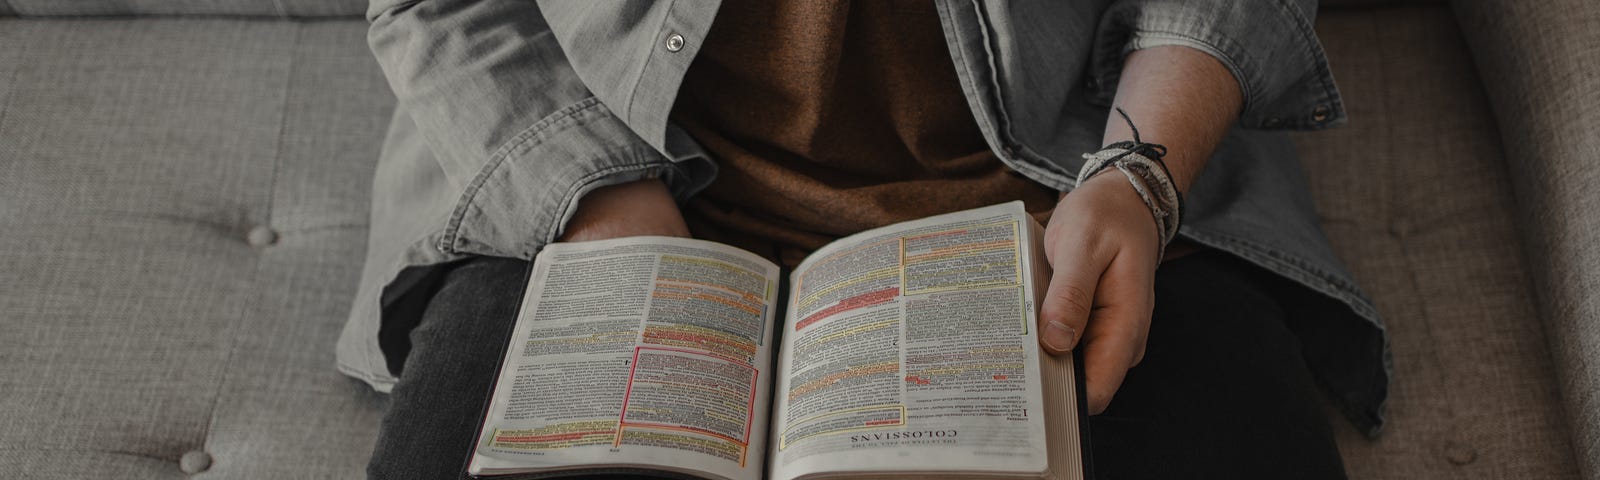 Man sitting on a sofa with a Bible open on his lap